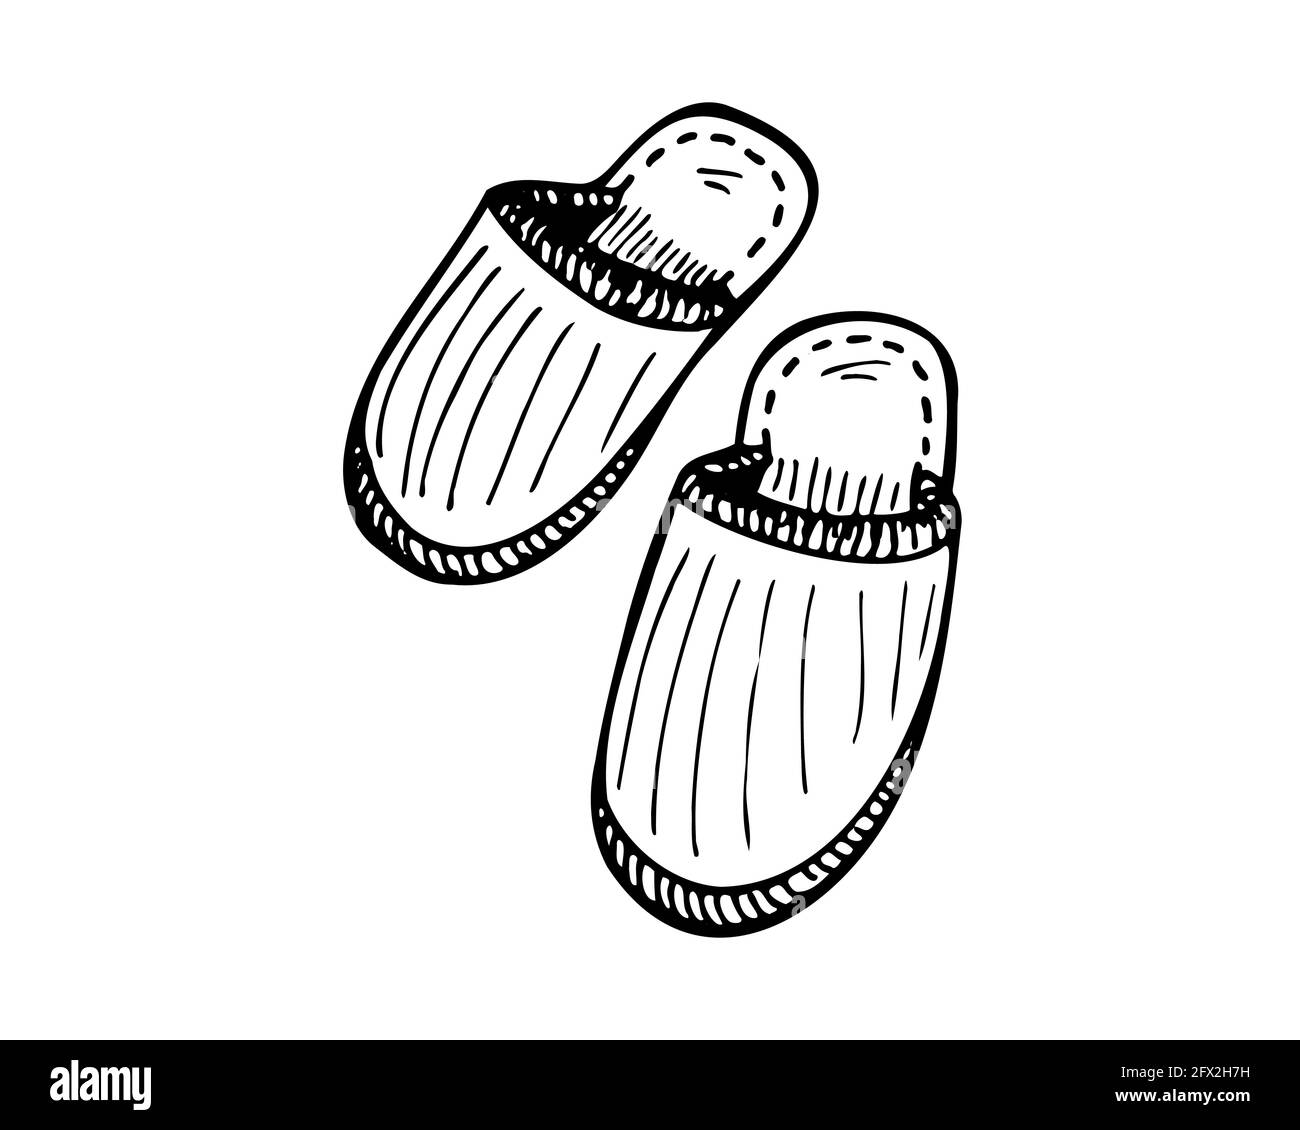 13681 Slipper Drawing Images Stock Photos  Vectors  Shutterstock